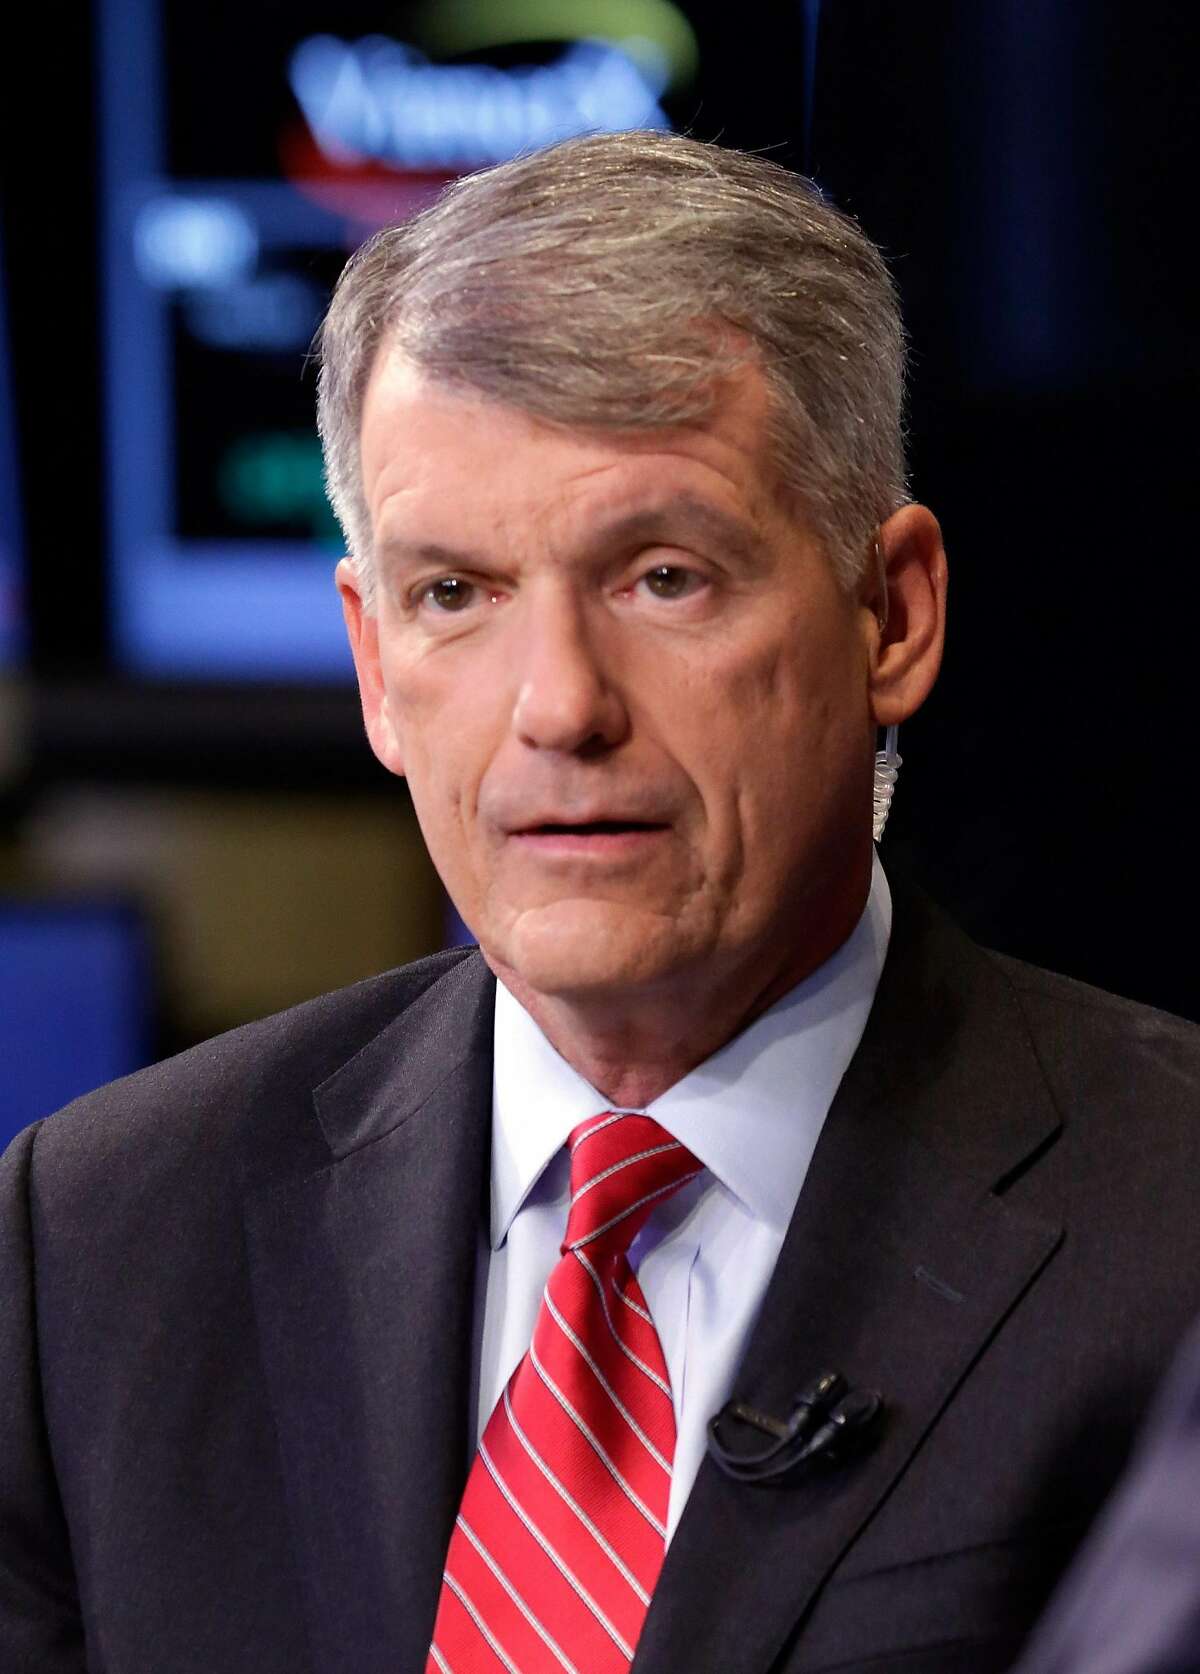 Wells Fargo Senior Executive Vice President and Chief Financial Officer Timothy J. Sloan is interviewed on the floor of the New York Stock Exchange, Wednesday, Nov. 13, 2013. (AP Photo/Richard Drew)